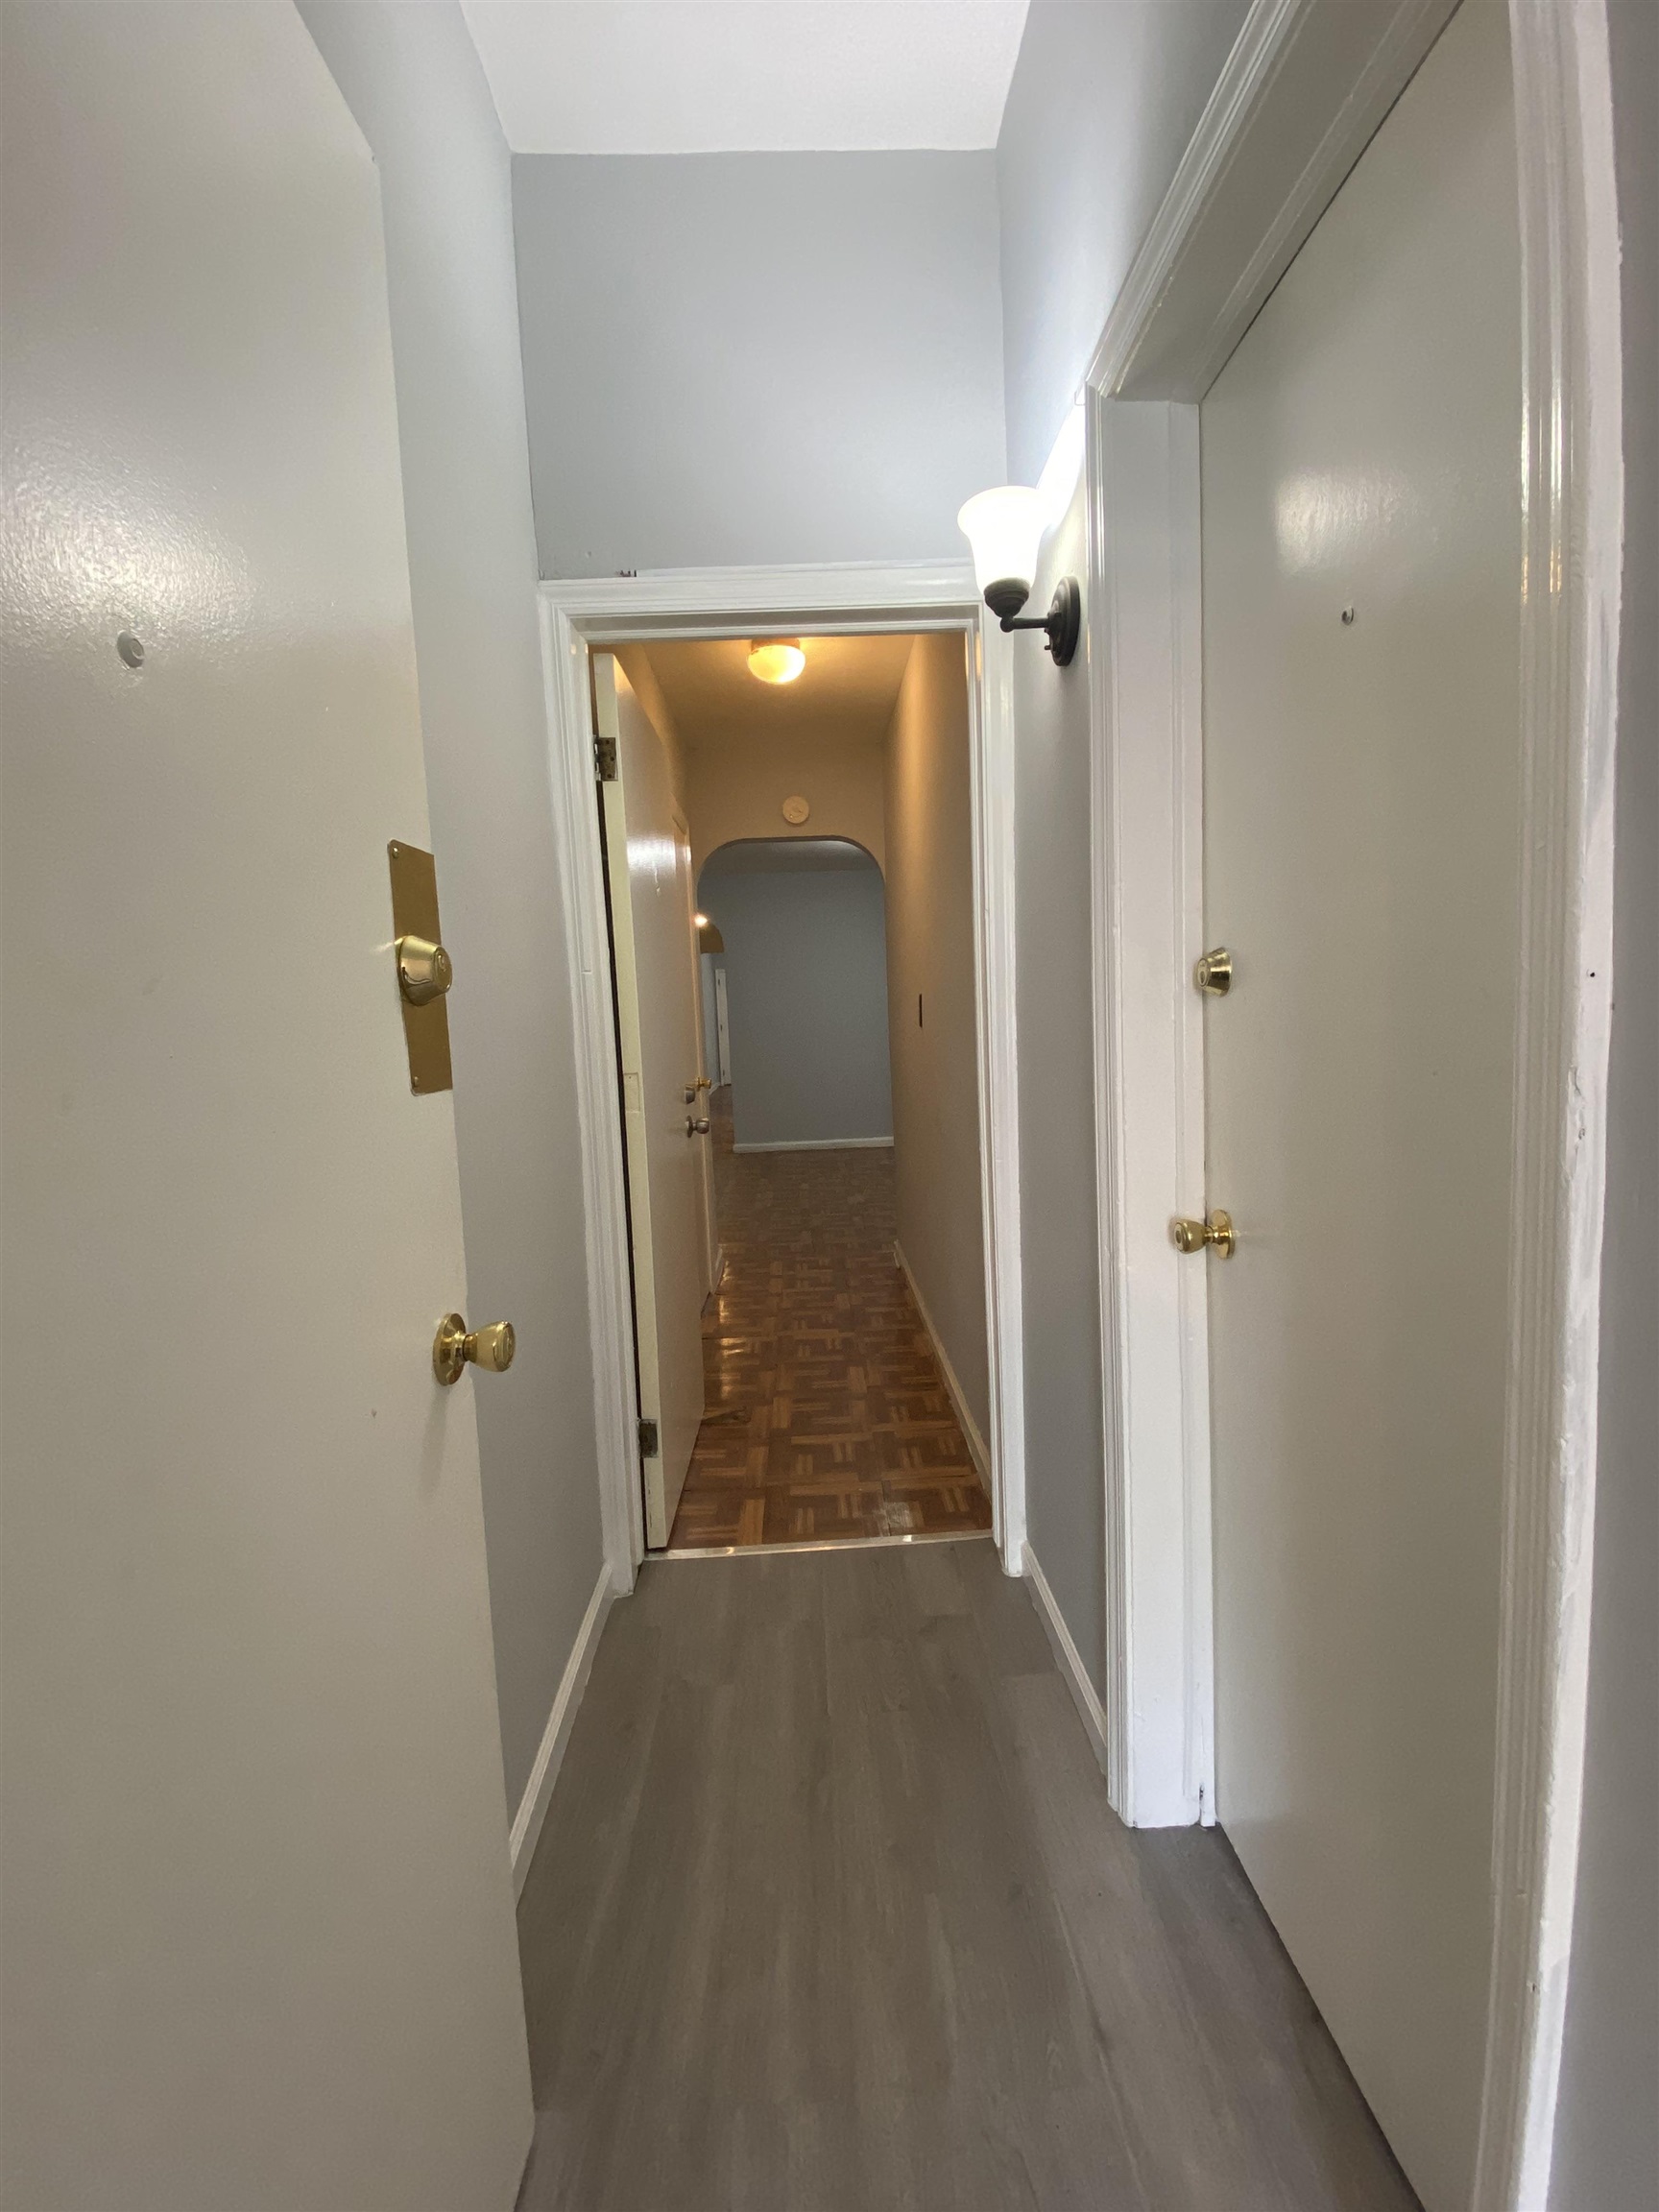 # 240008254 - For Rent in JERSEY CITY - Heights NJ